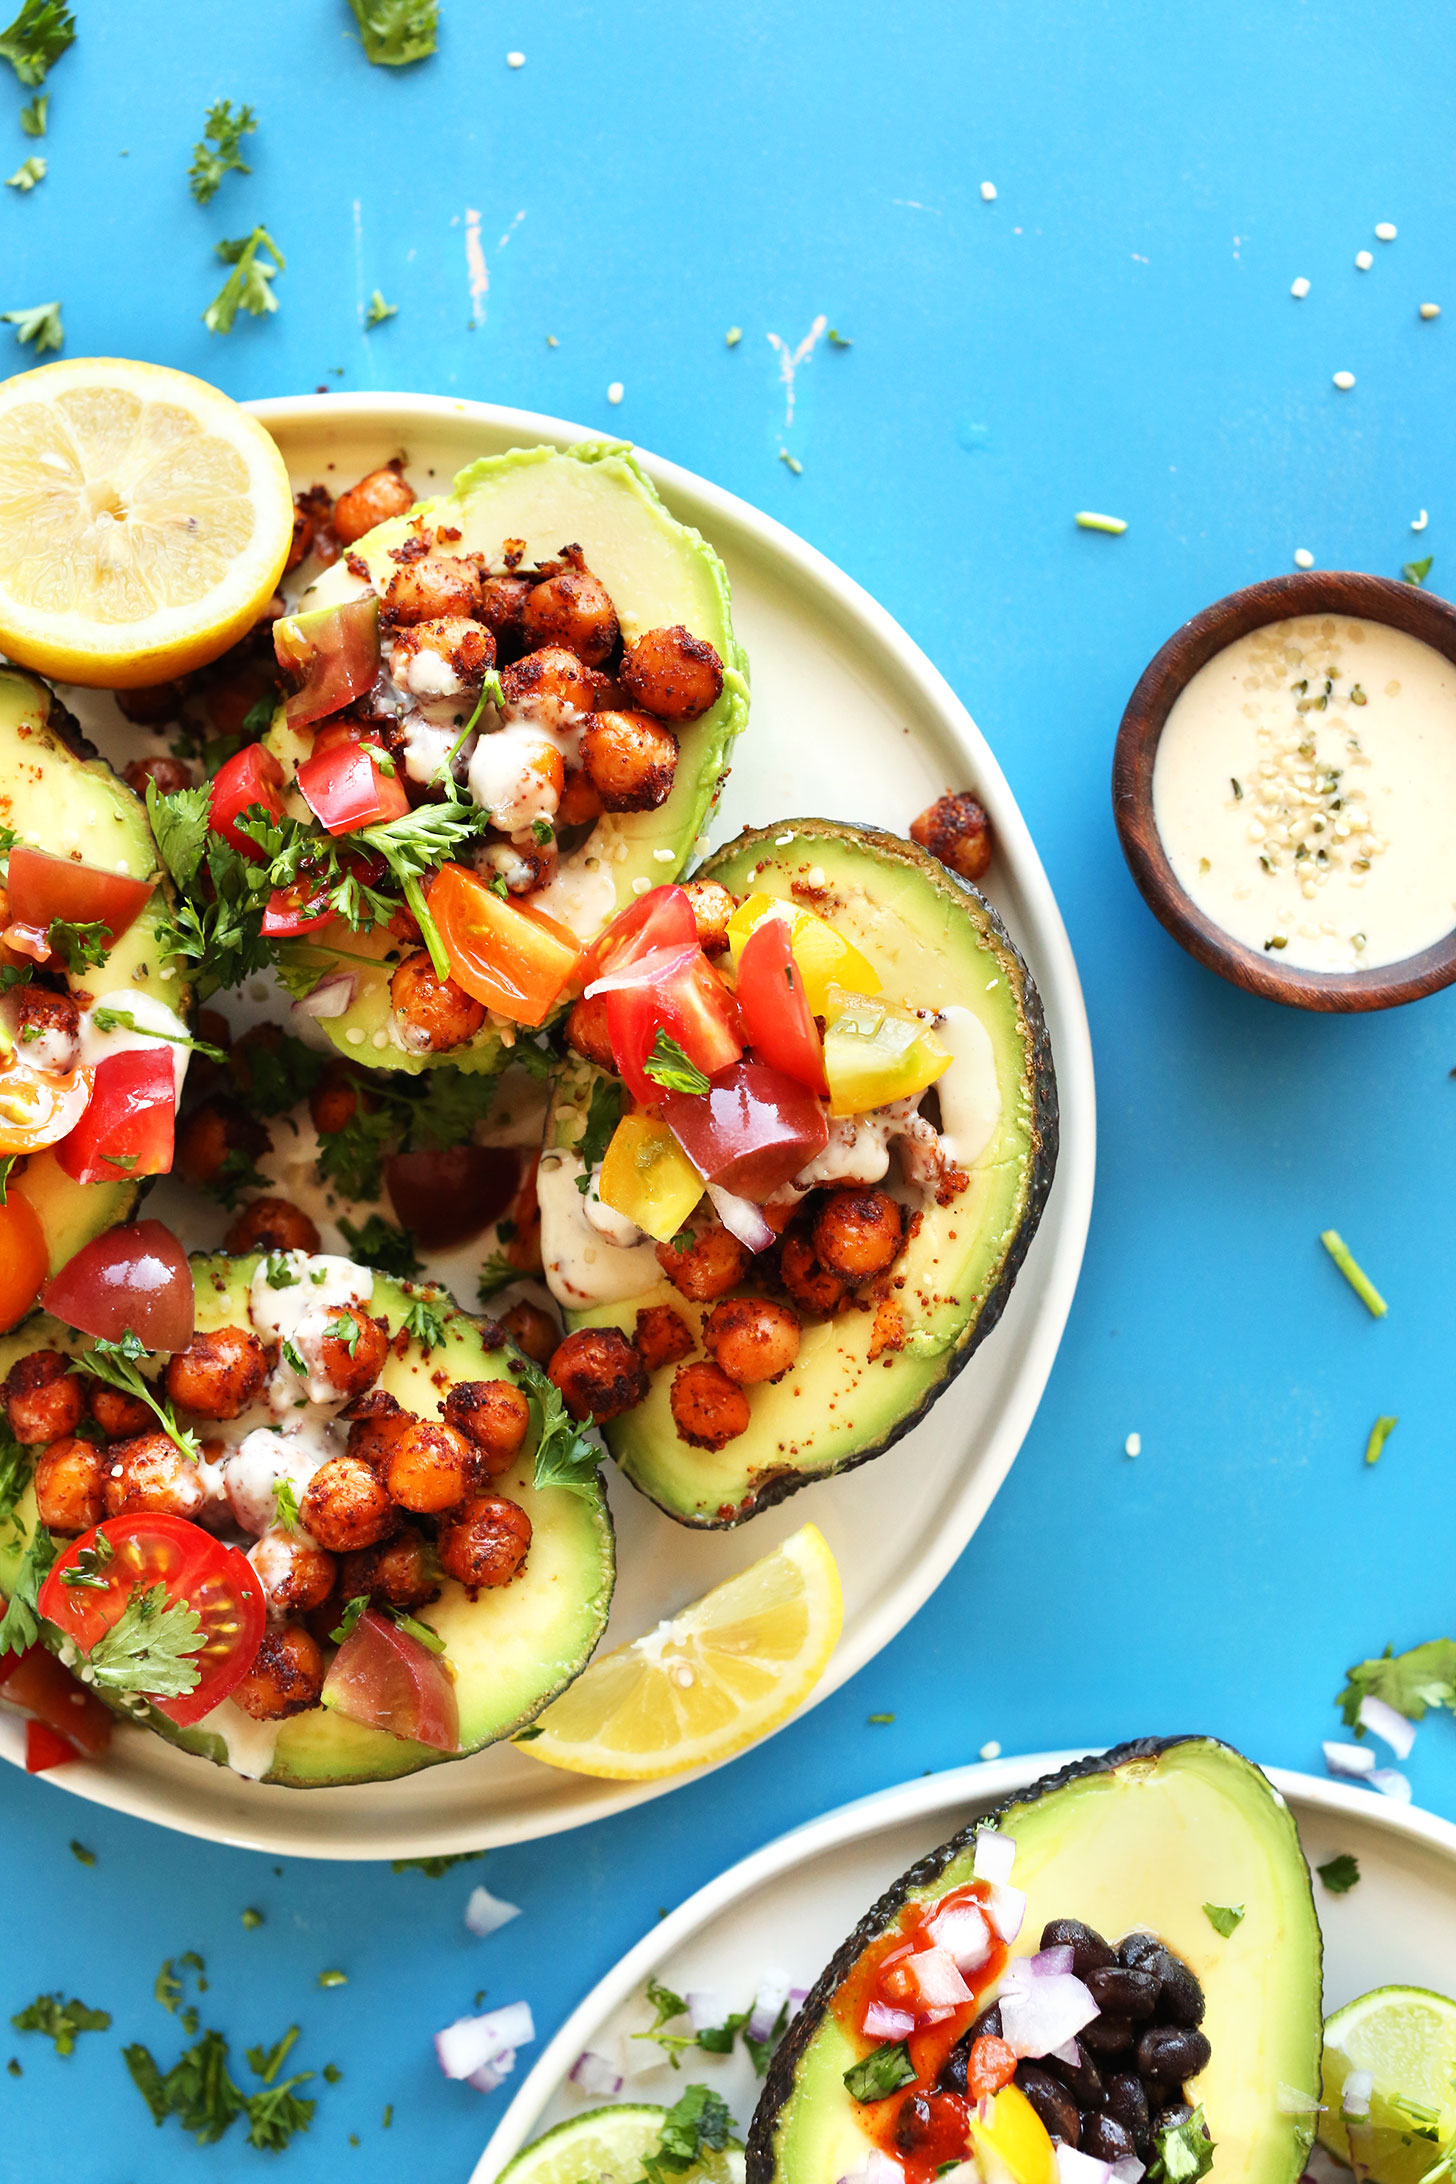 Plates of our Mediterranean- and Mexican-inspired avocado boat recipes